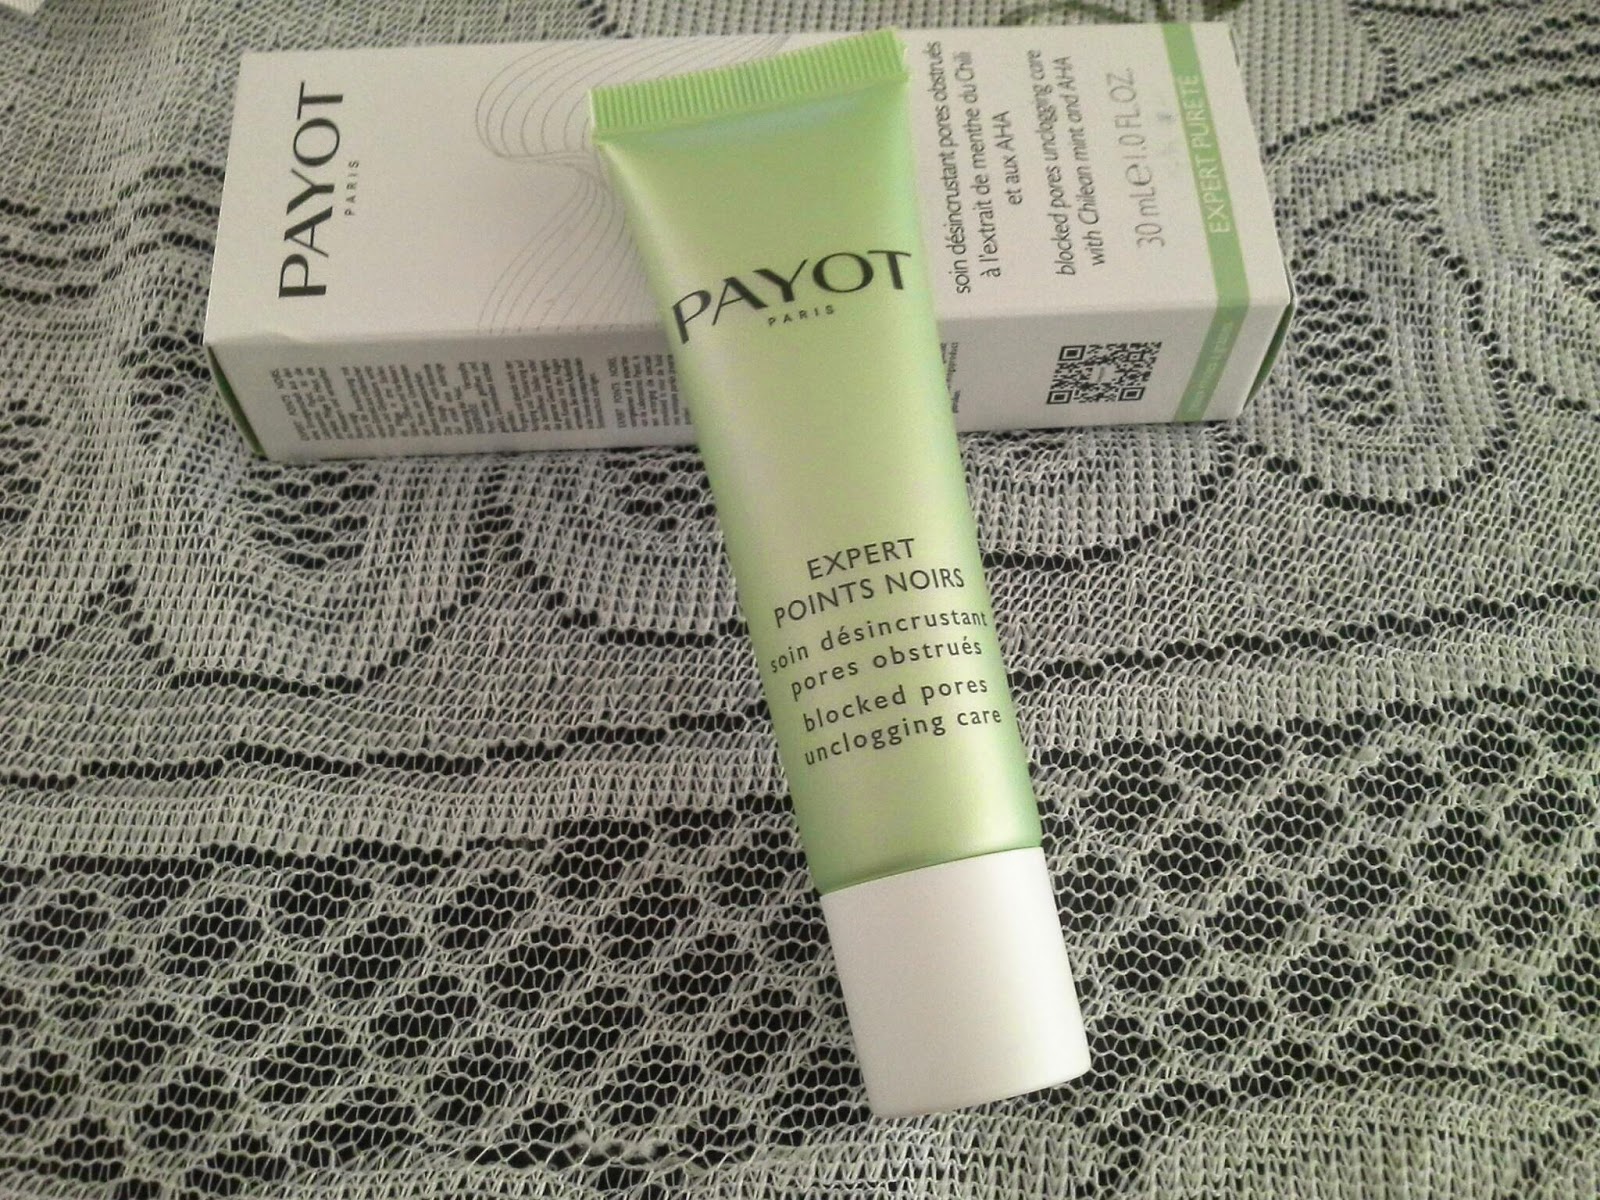 Beauty review:Payot Expert Purete Expert Points Noirs blocked pores  unclogging care – beautyandtheteeth